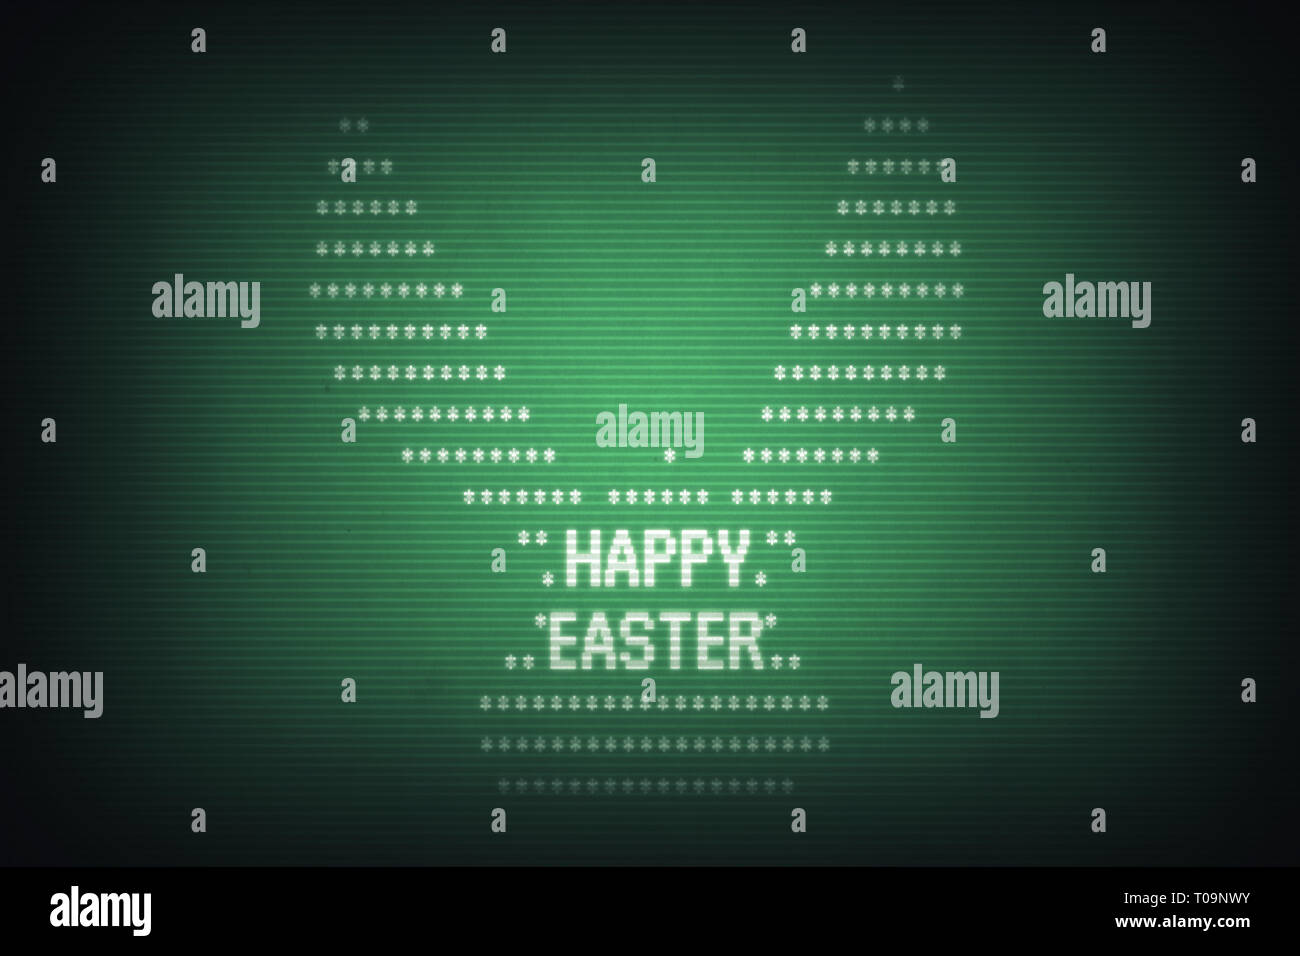 Happy easter message with rabbit head on old green computer screen Stock Photo